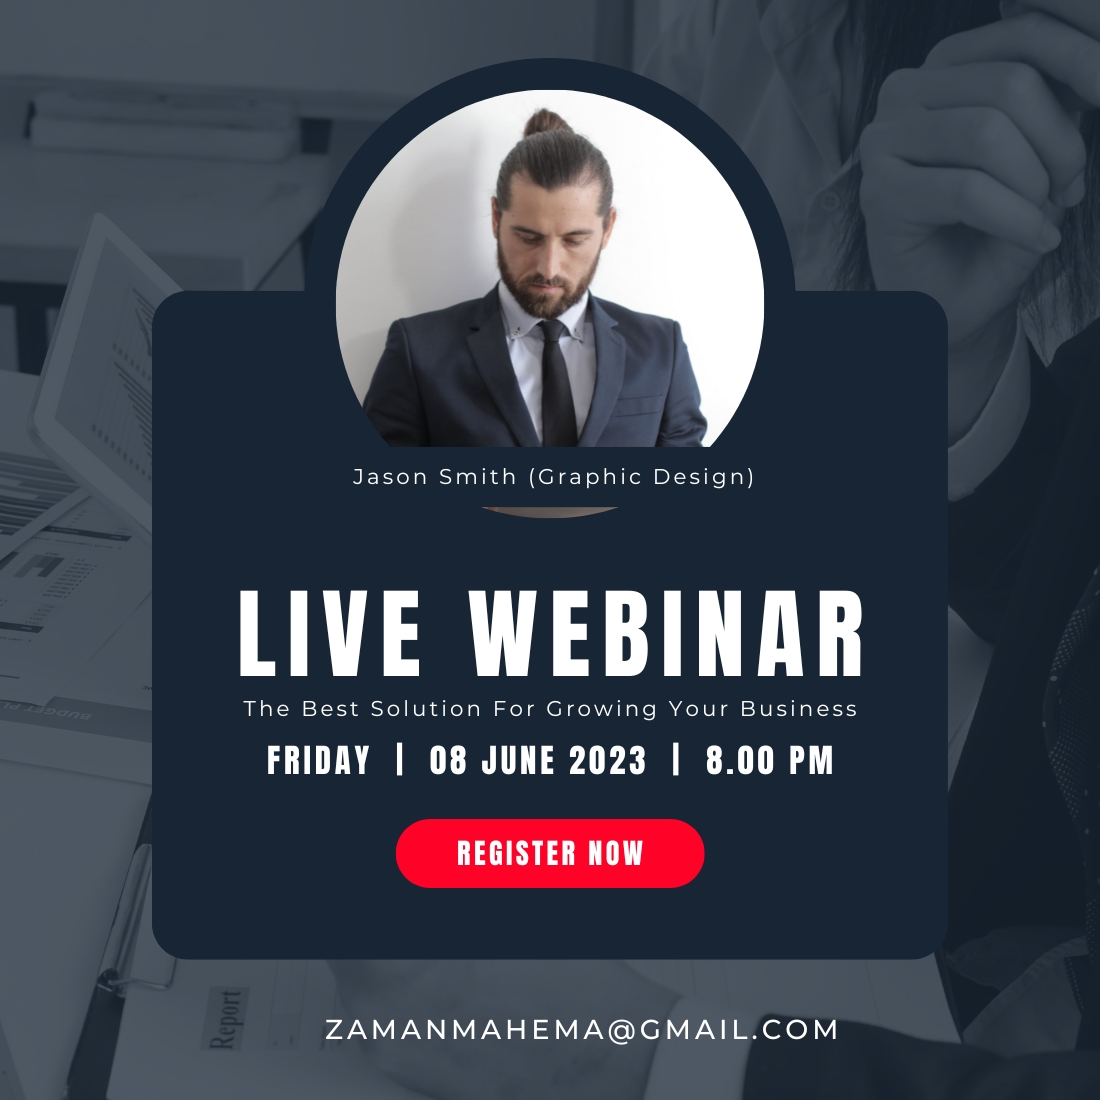 Amazing Business Webinar preview image.